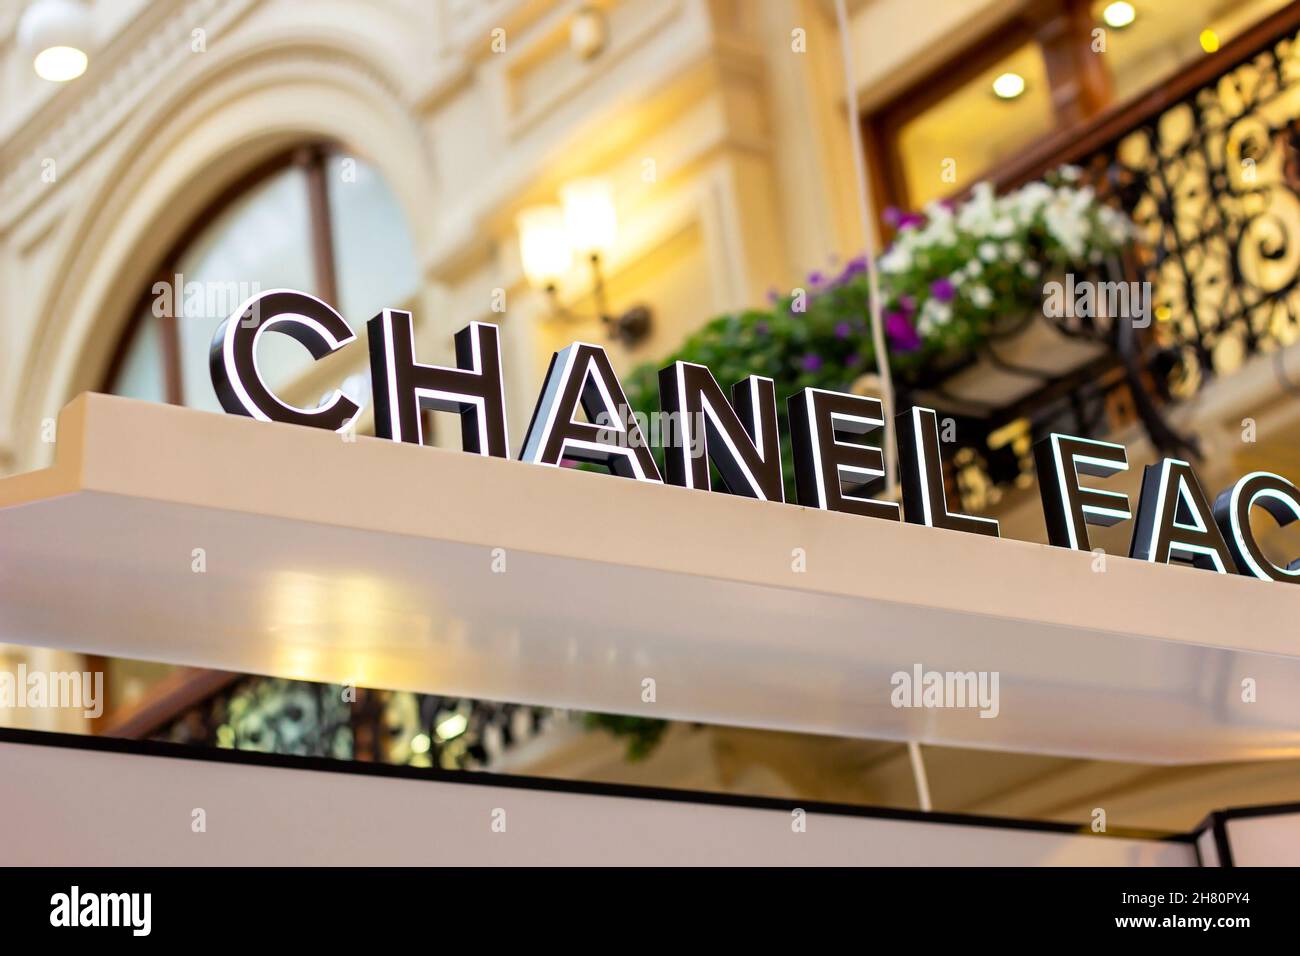 MOSCOW, RUSSIA - AUGUST 10, 2021: Chanel Factory 5 brand retail shop ...